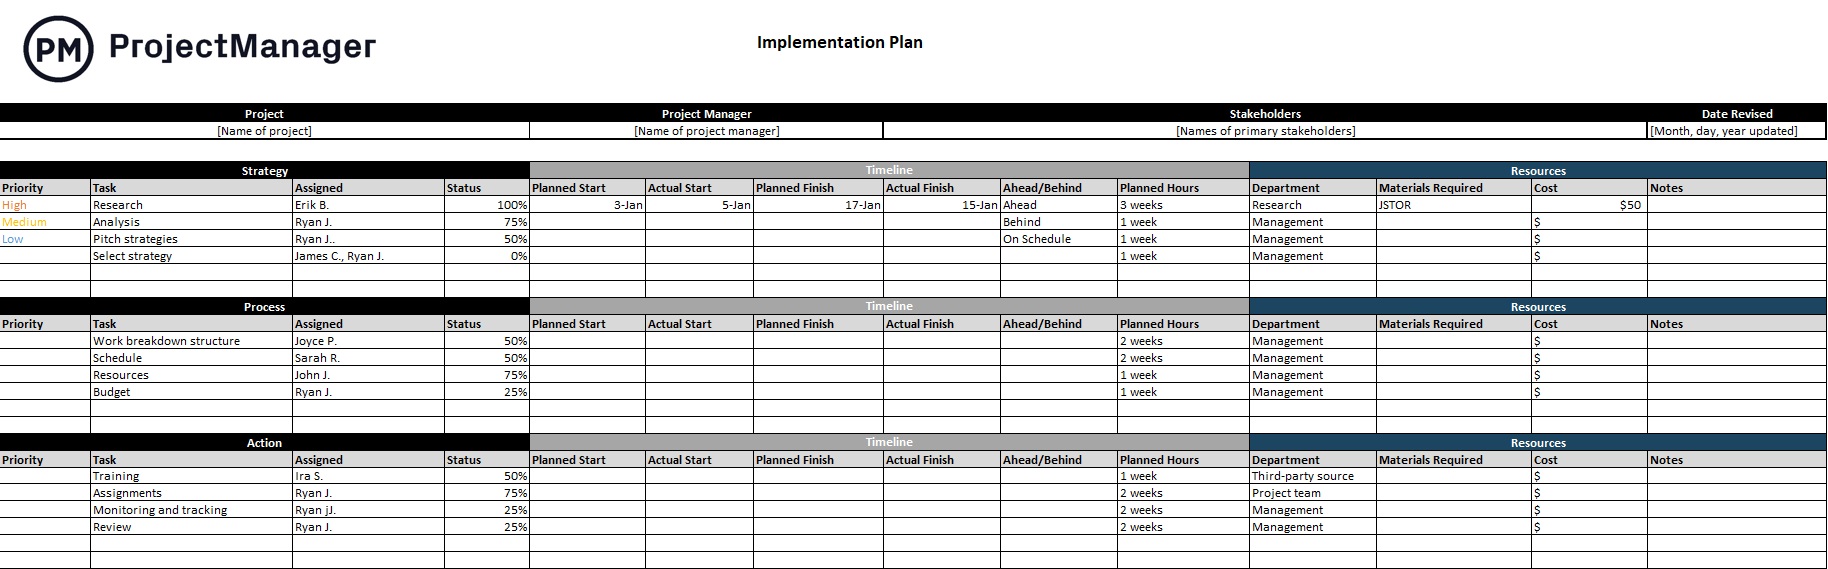 ProjectManager's implementation plan template